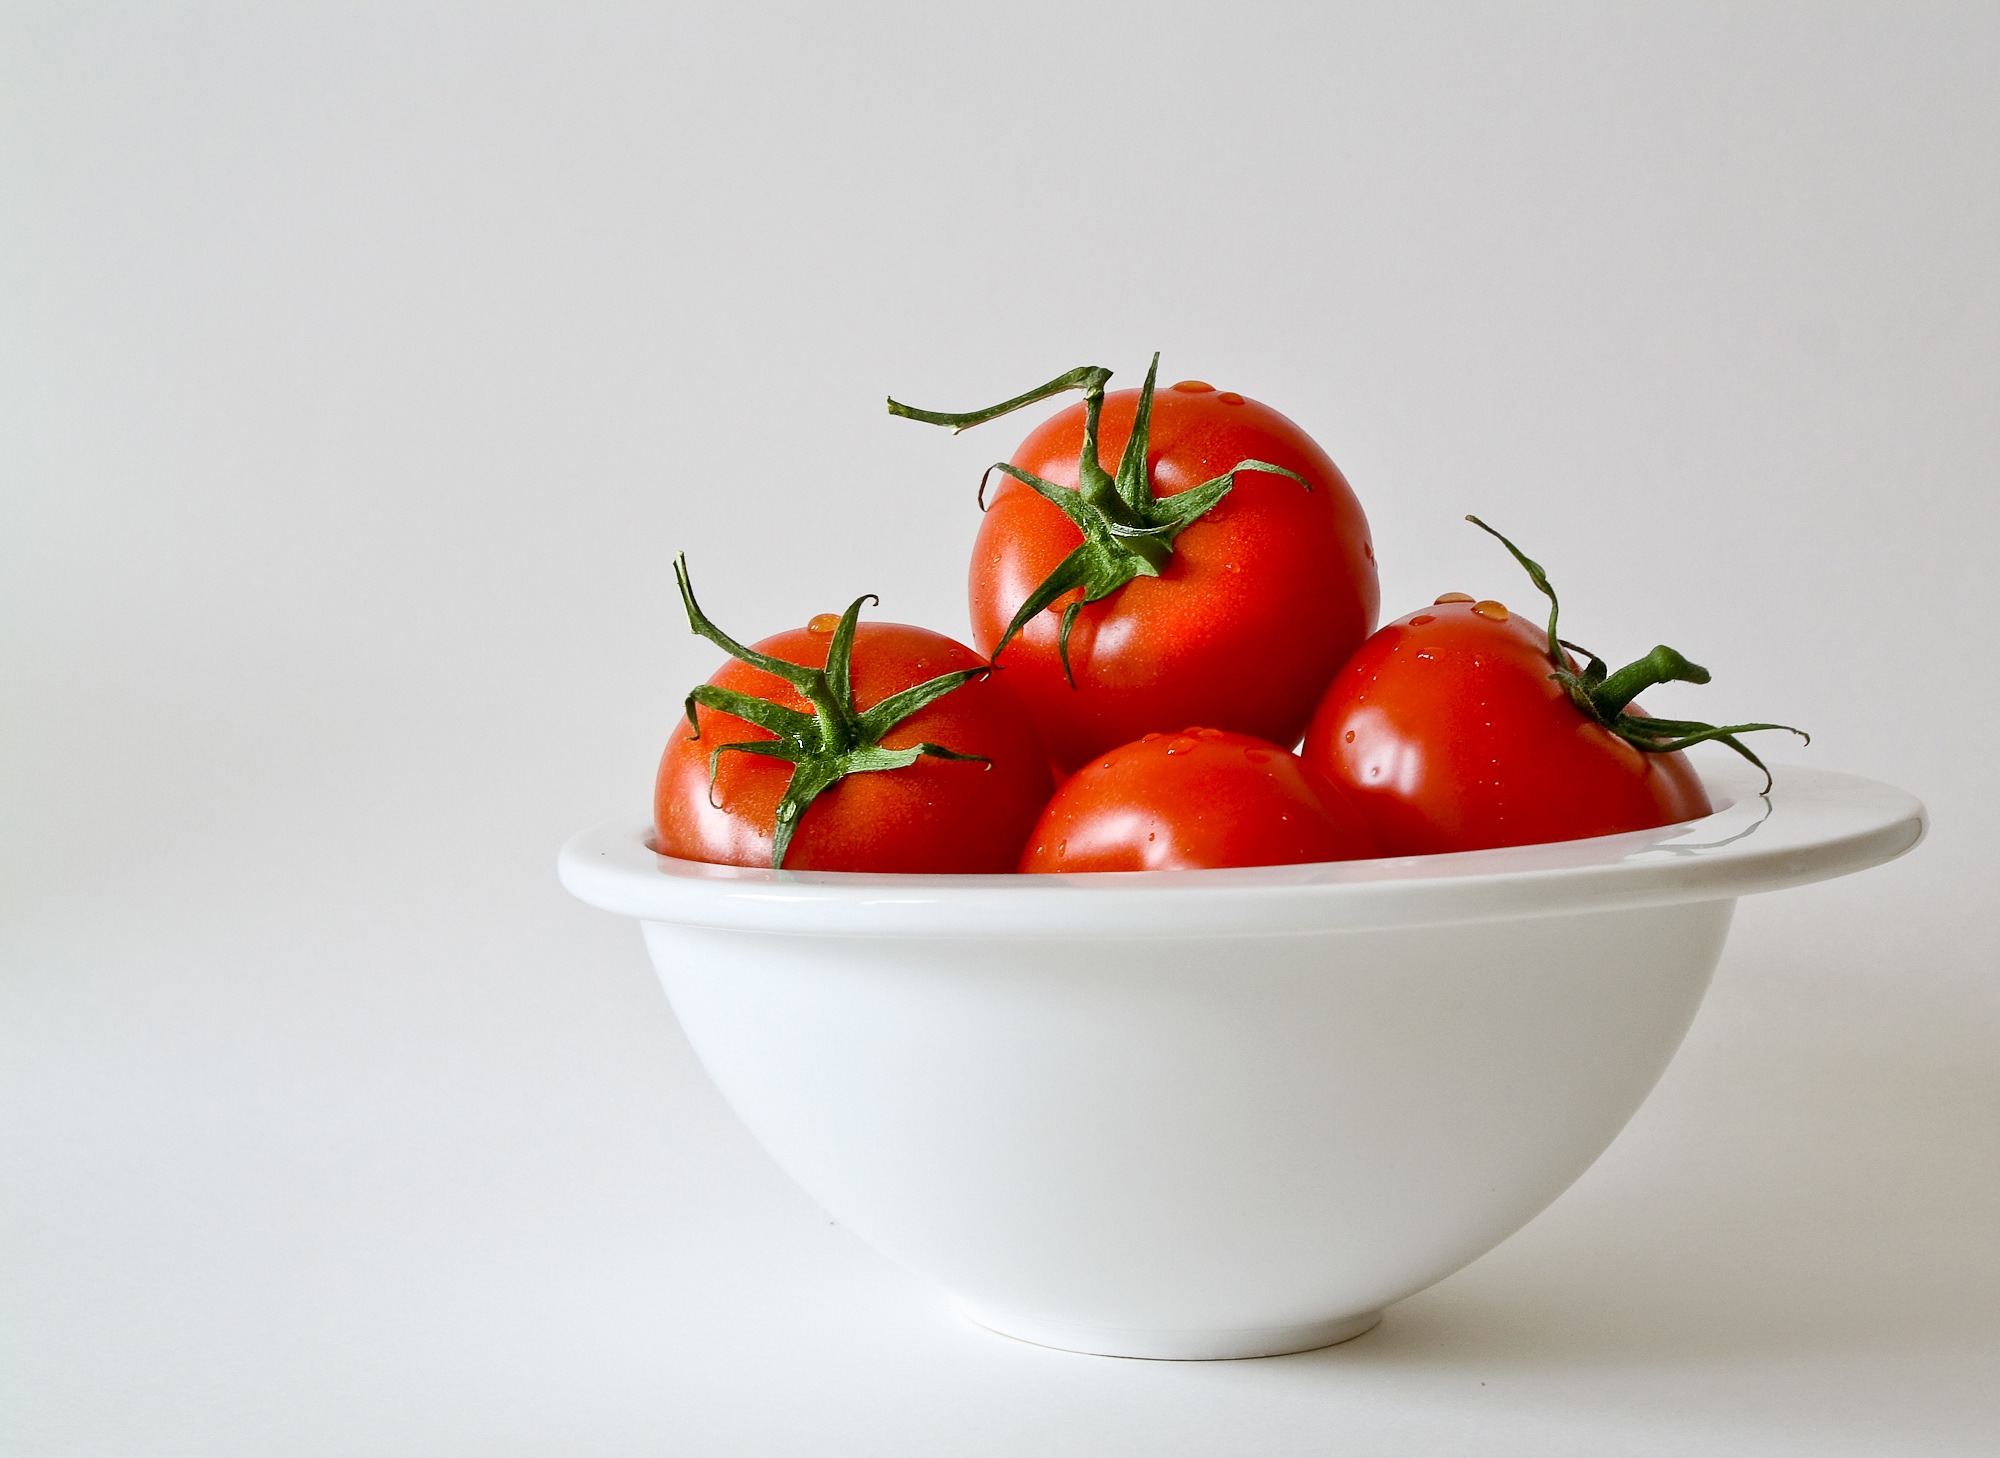 120908 download wallpaper vegetables, minimalism, plate, tomatoes screensavers and pictures for free